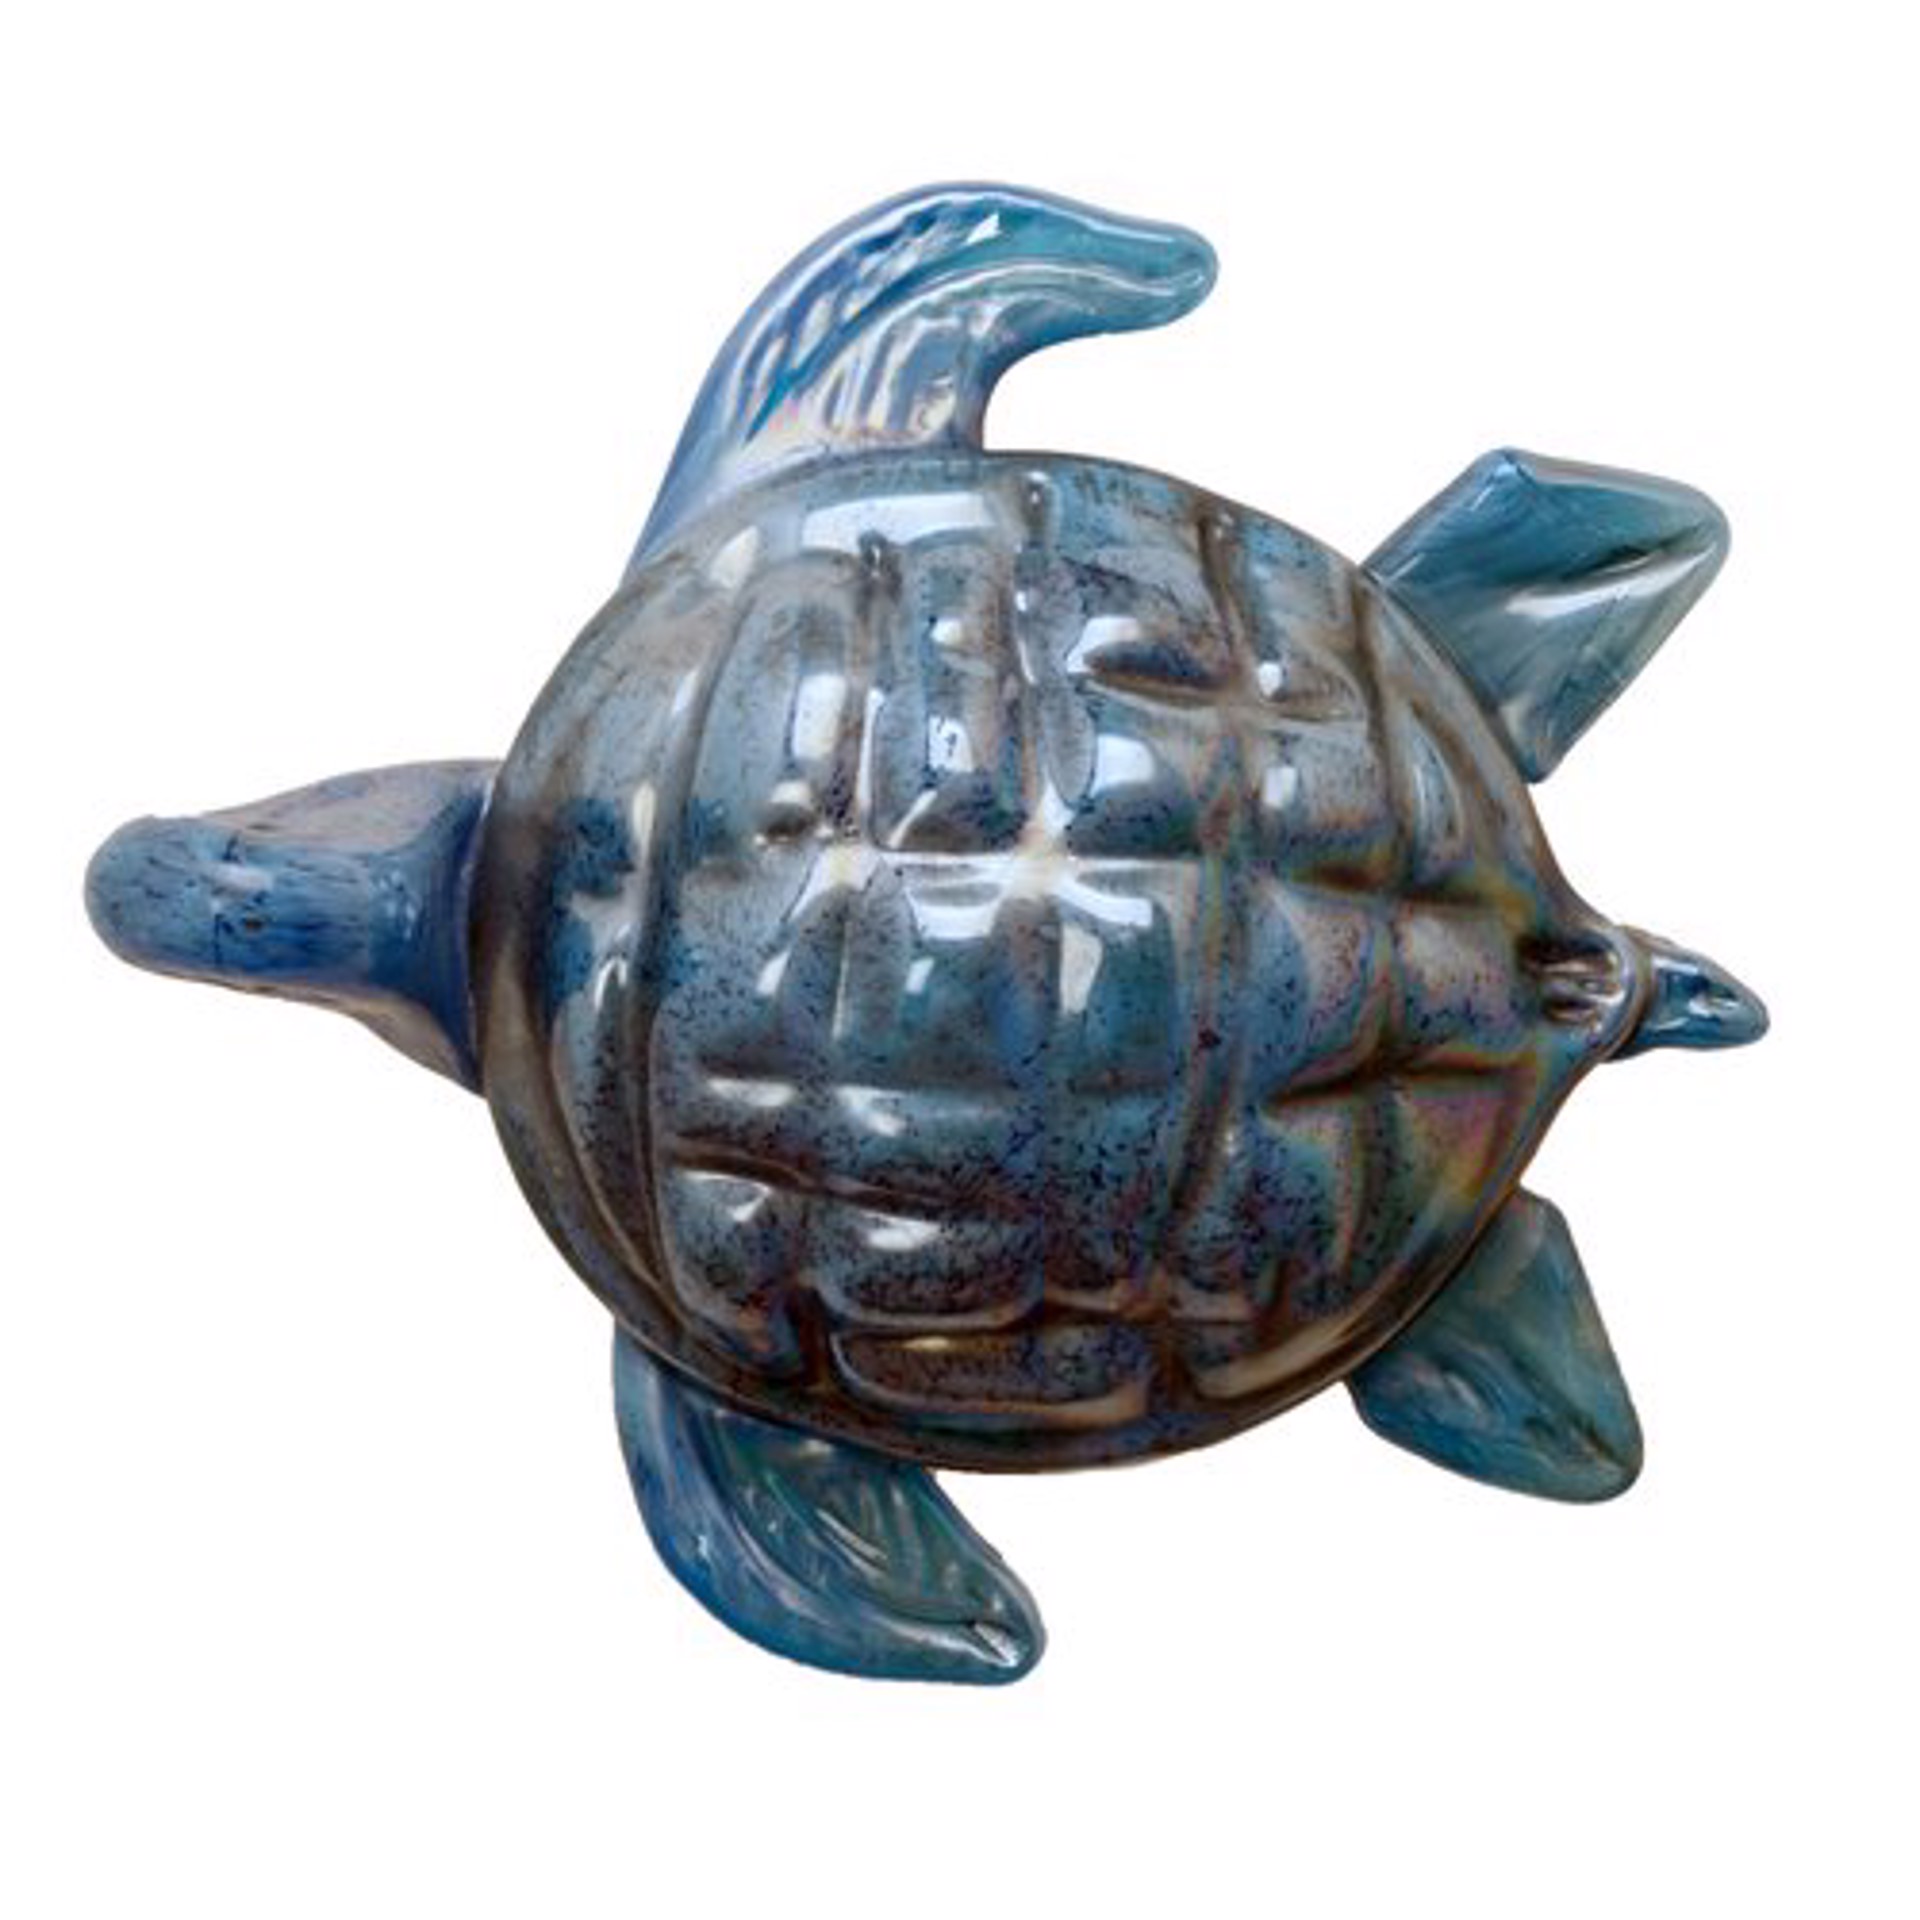 Small Blue Sea Turtle with Patterned Shell 7822SIR by V Handblown Glass